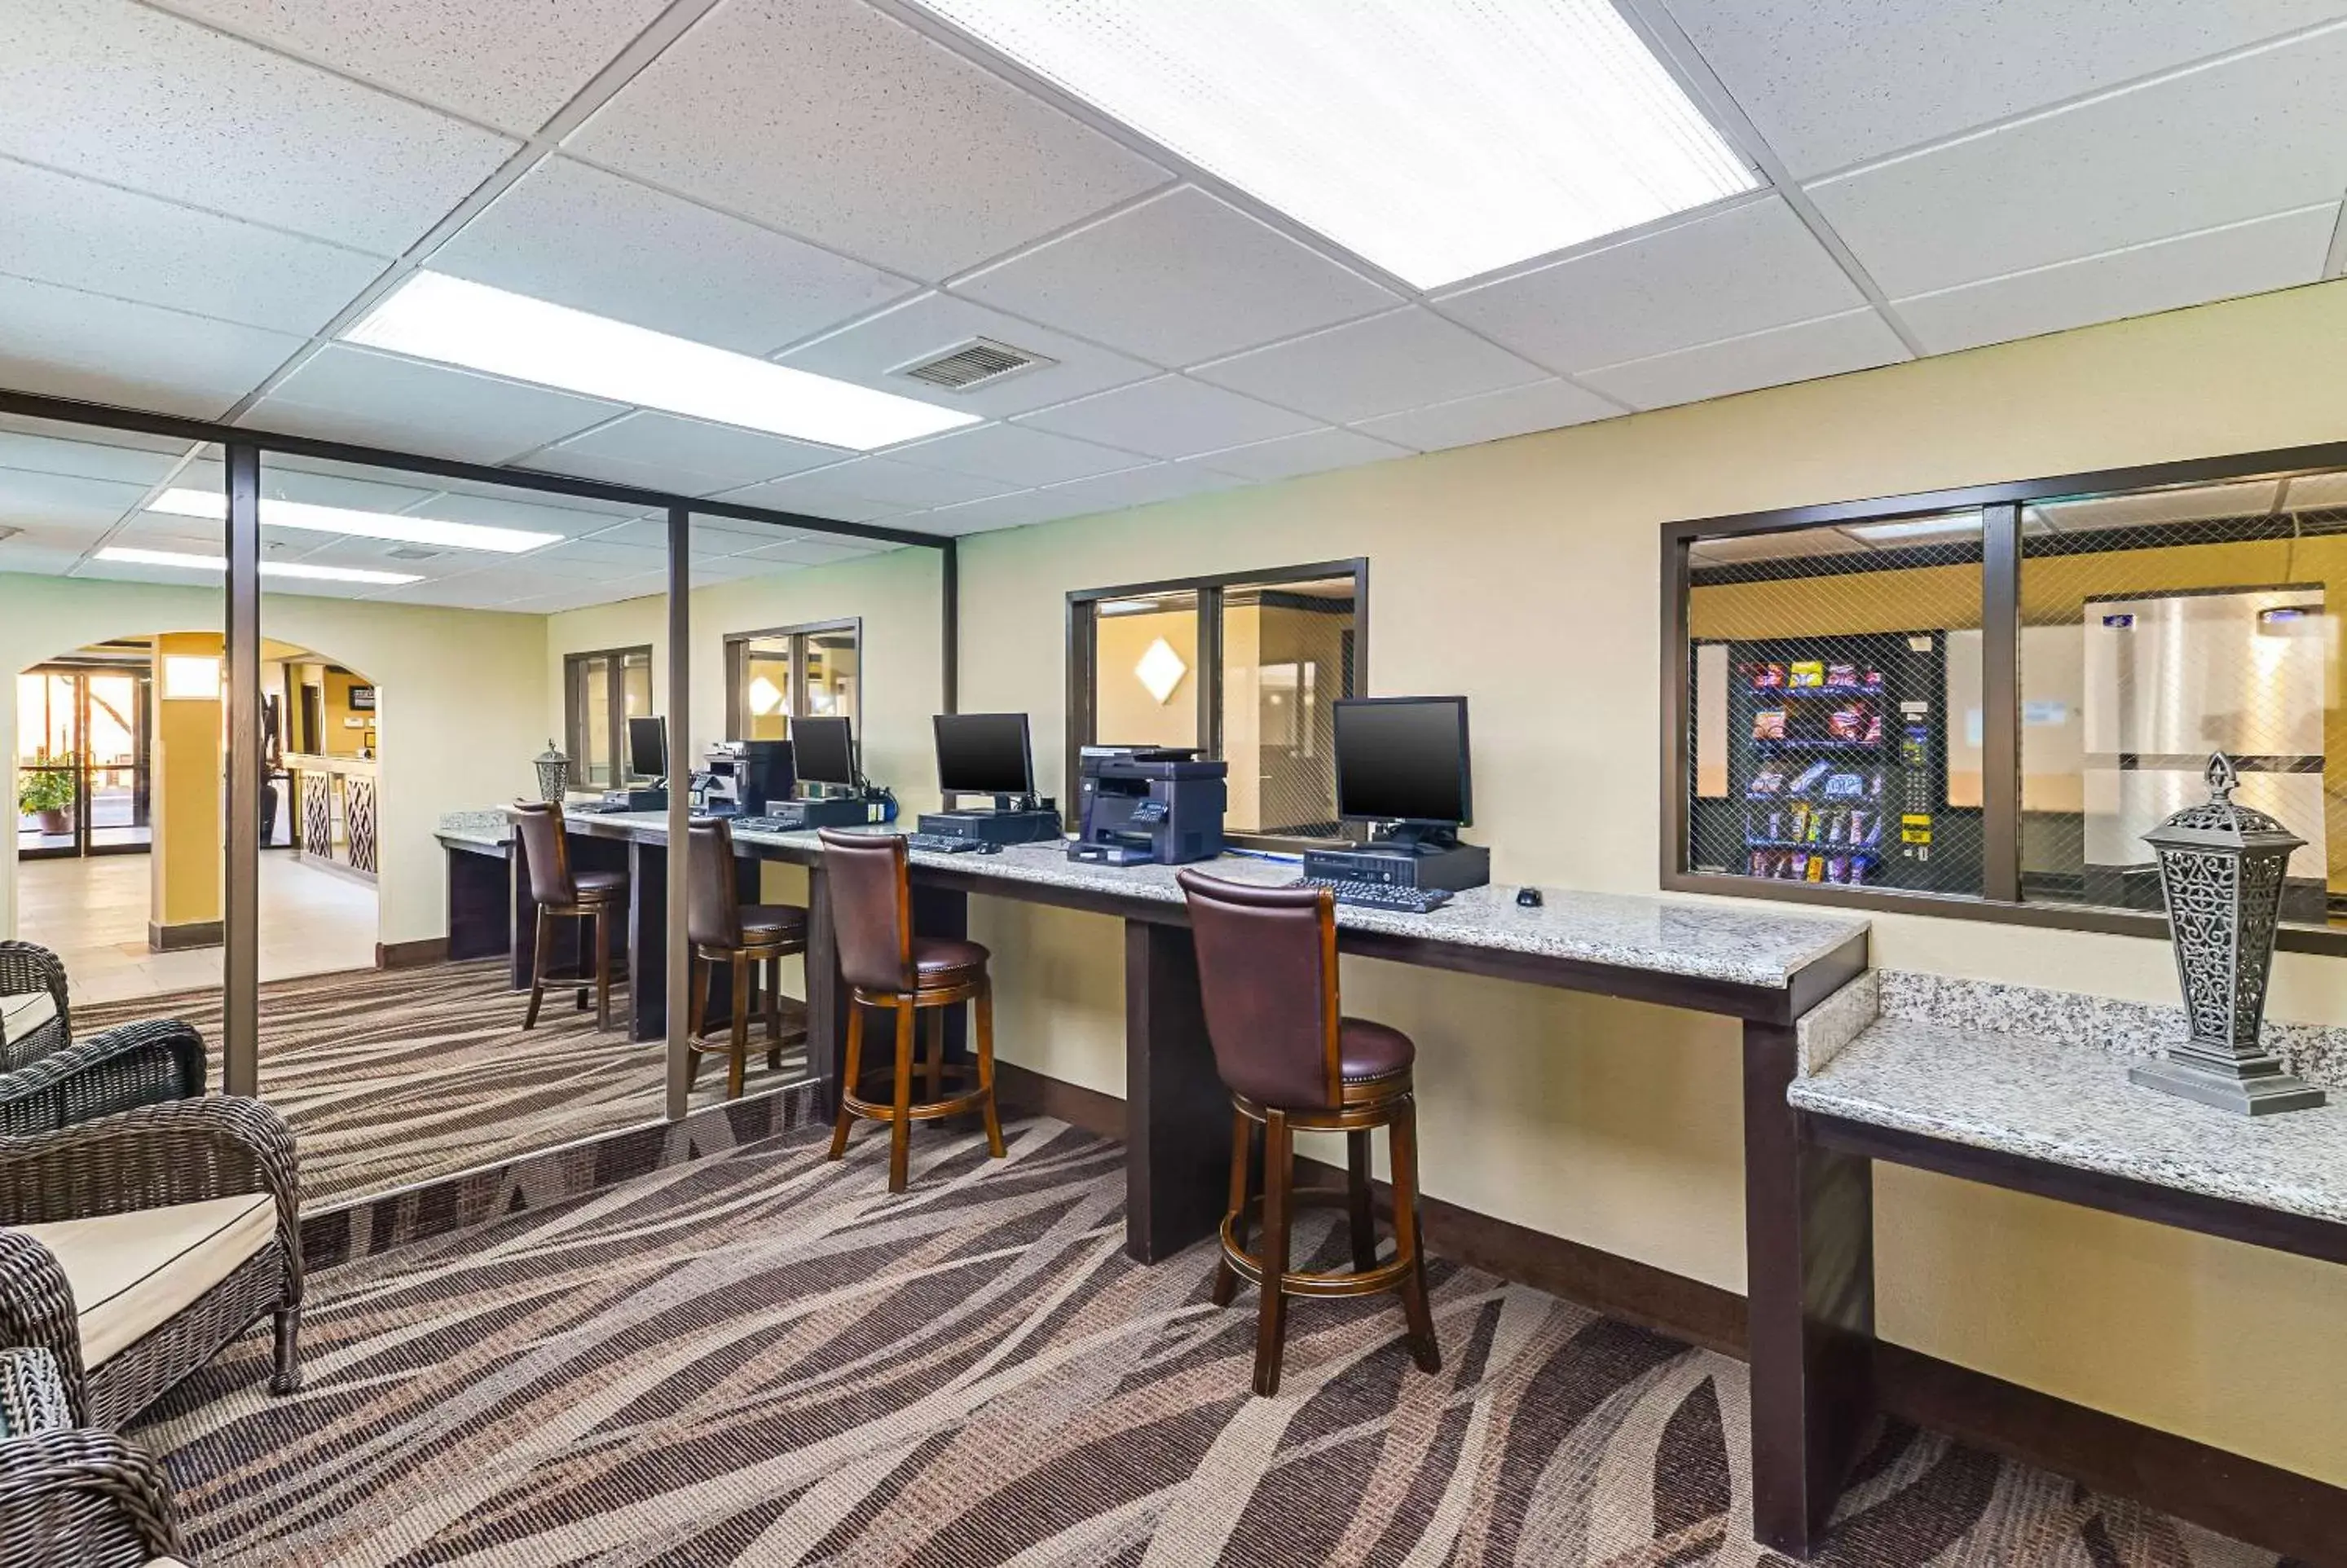 On site in Quality Inn & Suites Lubbock